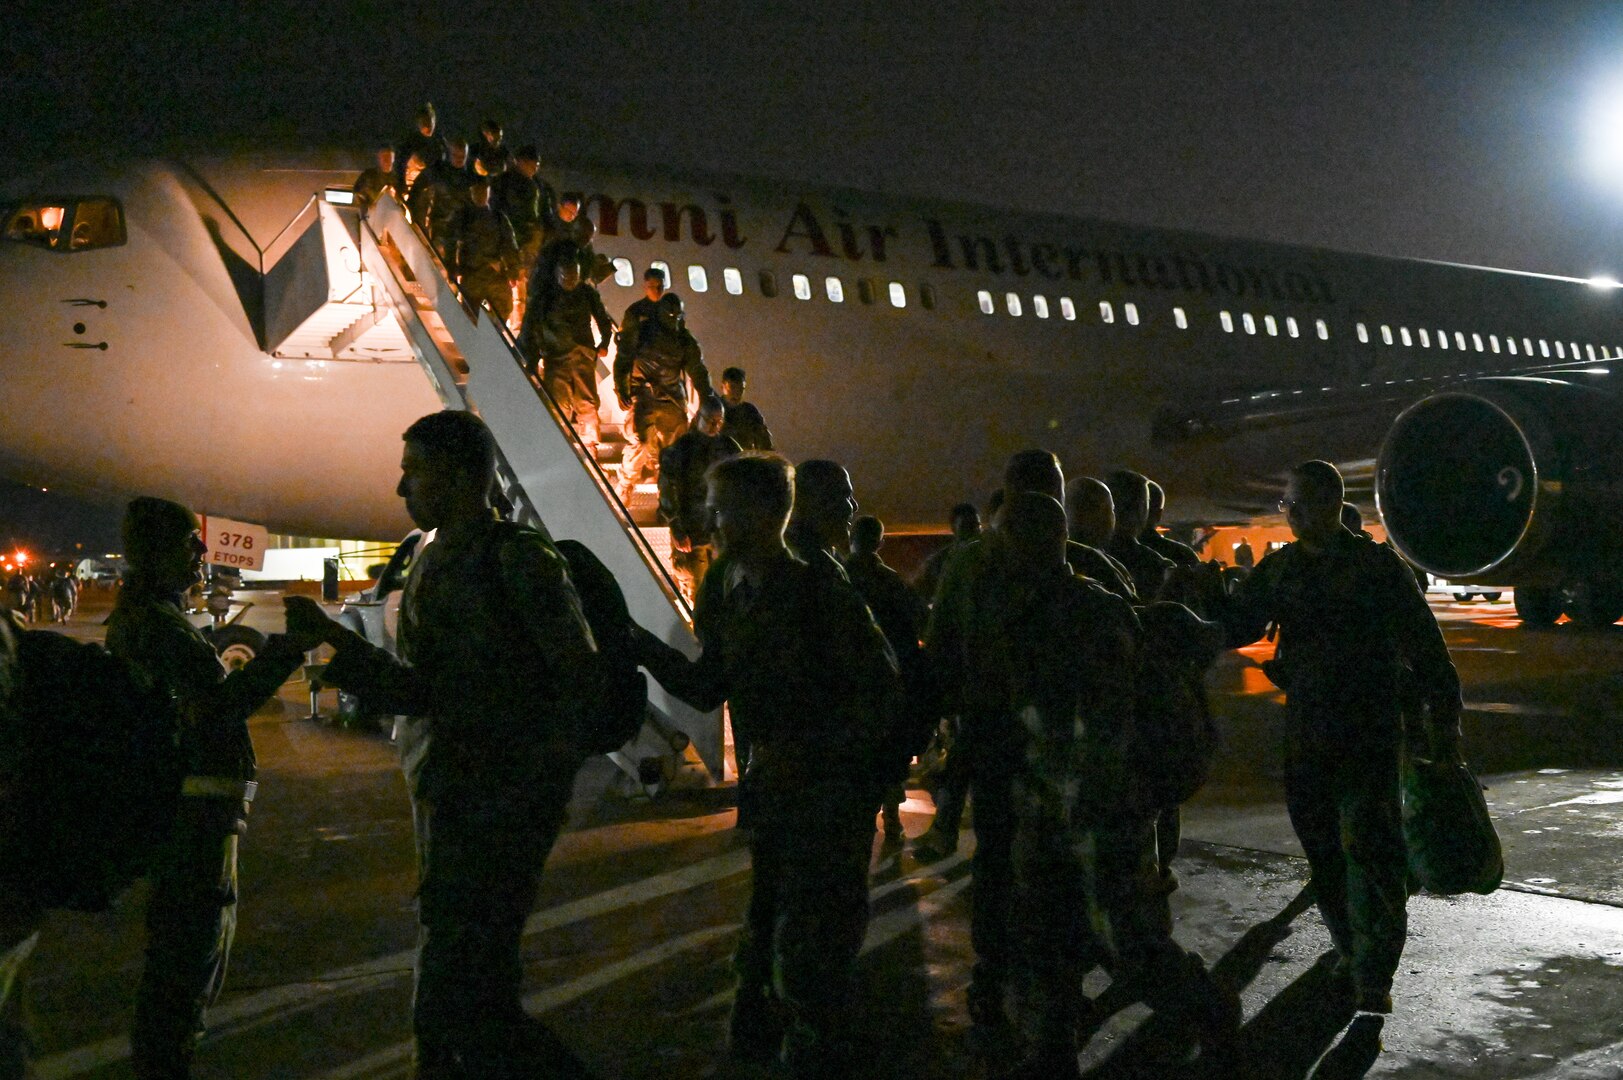 Airmen from the 23rd Expeditionary Bomb Squadron disembark a jet and are greeted by base leadership on the flightline at Minot Air Force Base, North Dakota, Sept. 24, 2022. The 23rd BS personnel were deployed to RAF Fairford, England in support of United States in Europe and Air Forces Africa command. (U.S. Air Force photo by Senior Airman Zachary Wright)